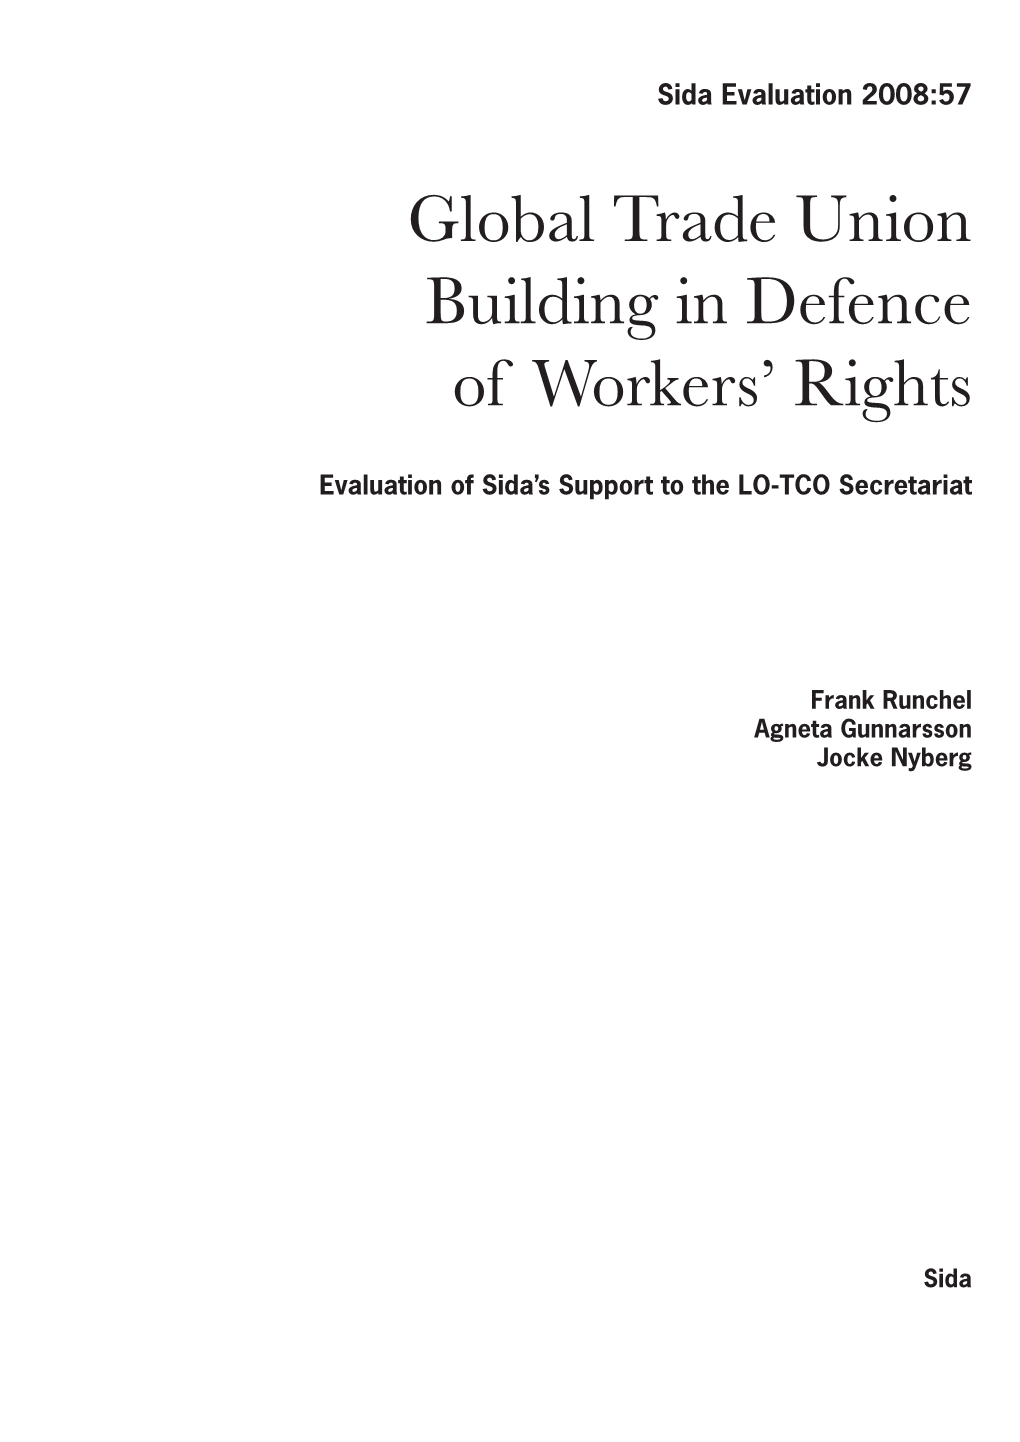 Global Trade Union Building in Defence of Workers' Rights